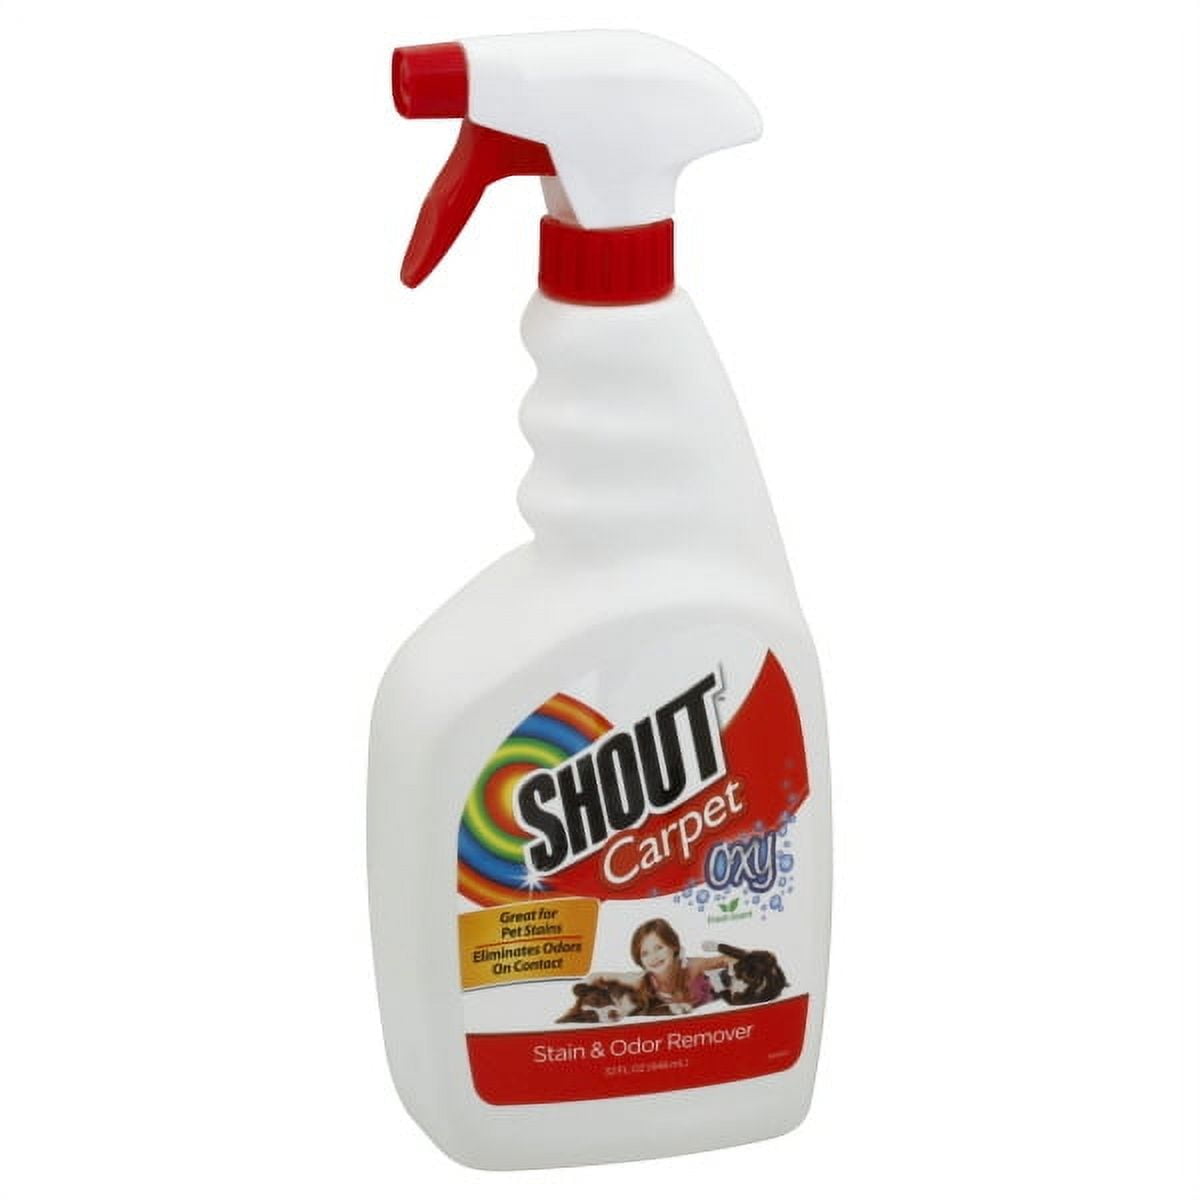 Shout Foam Carpet Cleaner. 2 pack eliminates pet stains & odors. NWT (9)